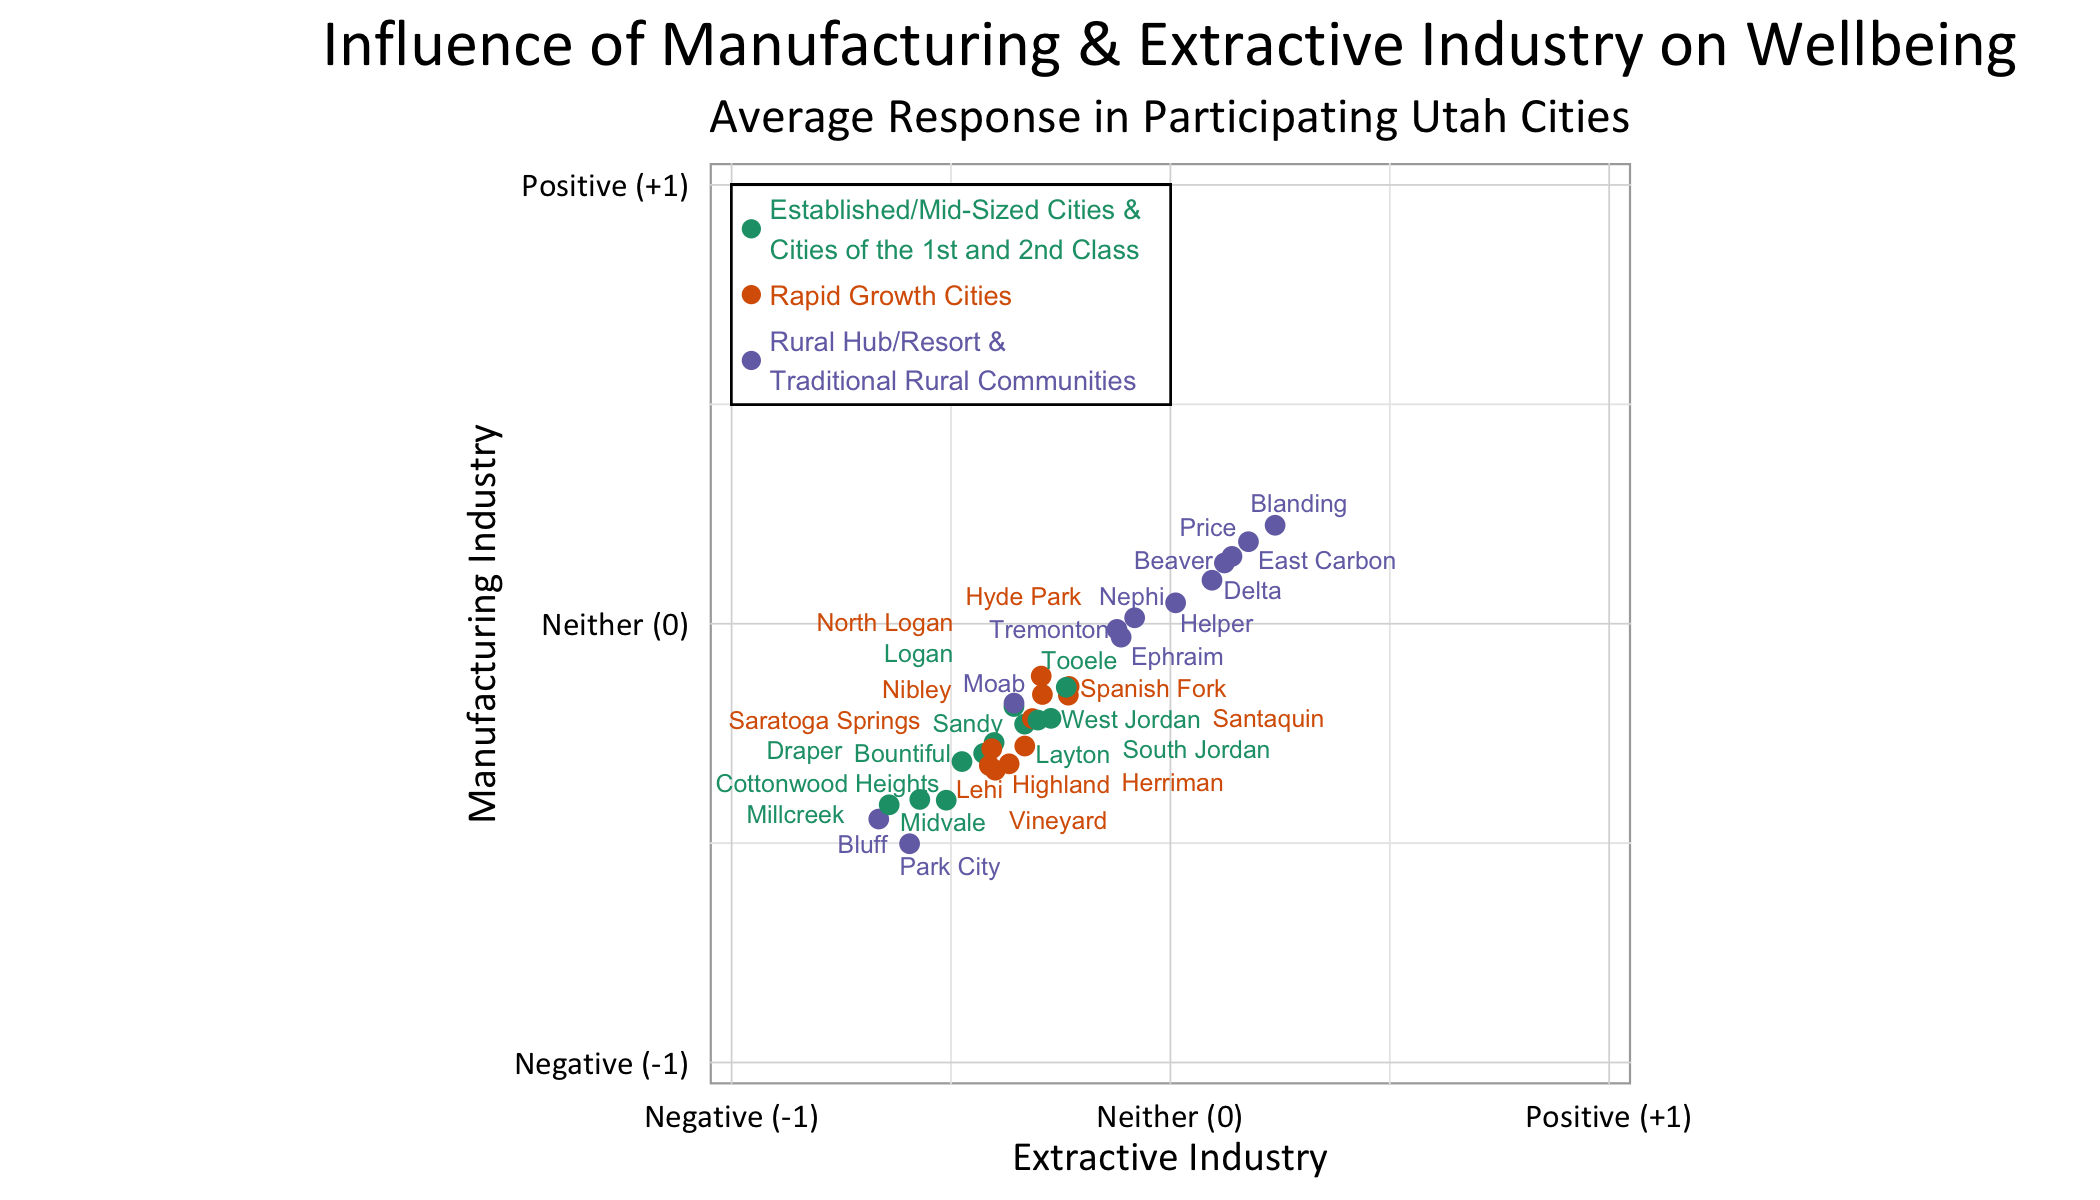 Type: Dot Plot. Title: Influence of Manufacturing & Extractive Industry on Wellbeing. Subtitle: Average Response in Participating Utah Cities. Data: The trend shows Rural Hub/Resort & Traditional Rural Communities viewing manufacturing and extractive industry more postively than the others. Except Park City and Bluff are the two at the bottom viewing both types of industry the most negatively.